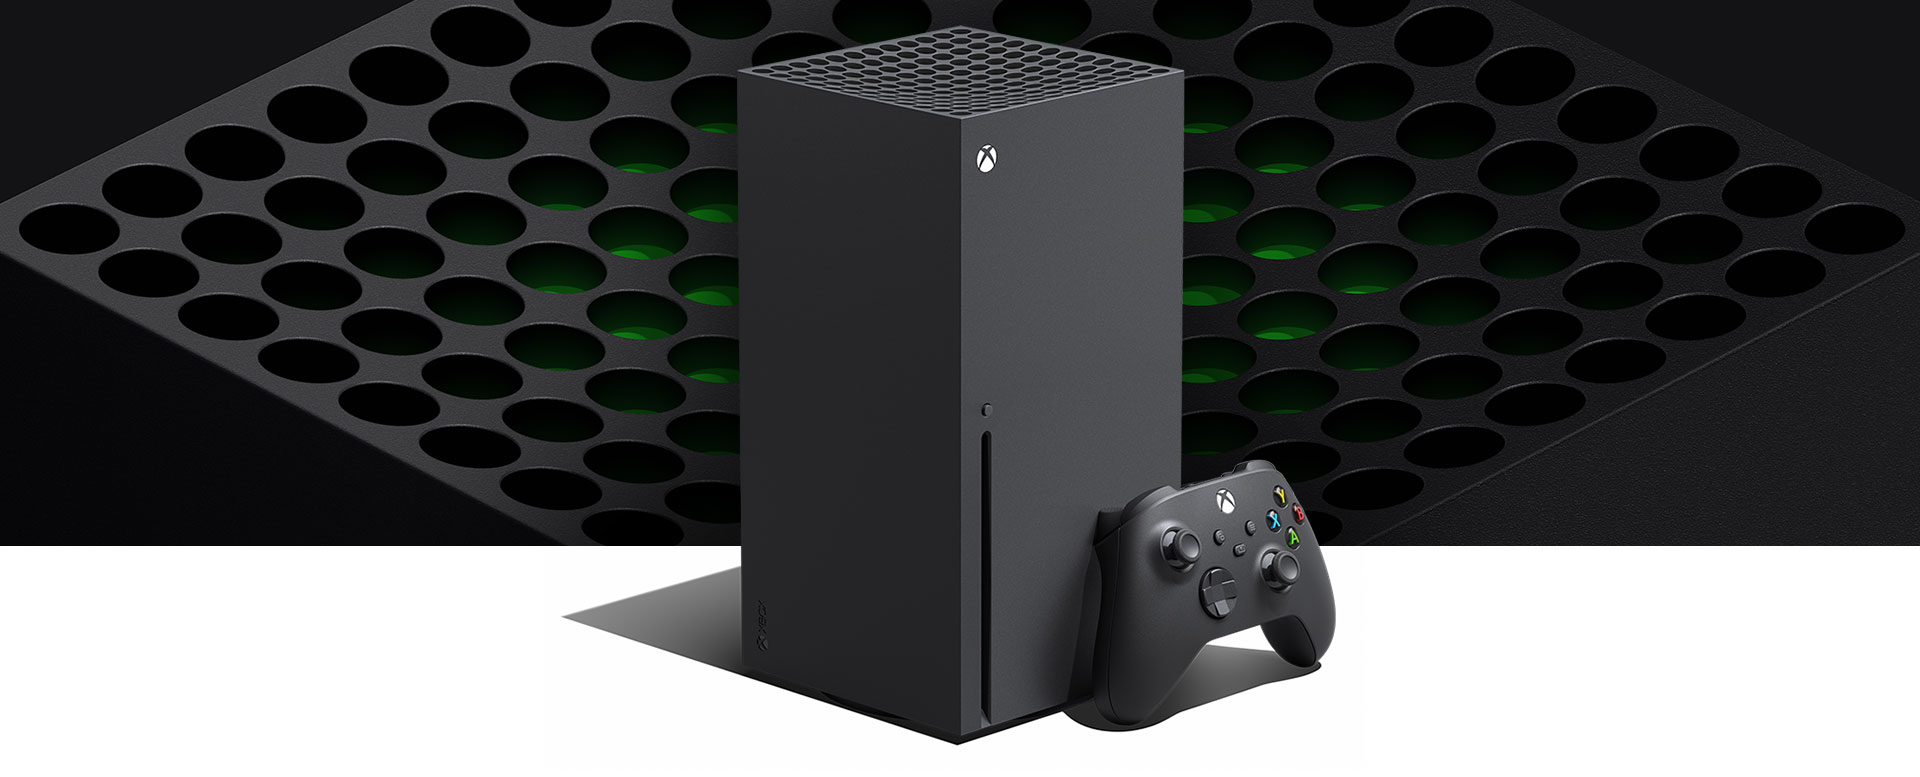 Xbox Series X in front of the top fan on the Xbox Series X